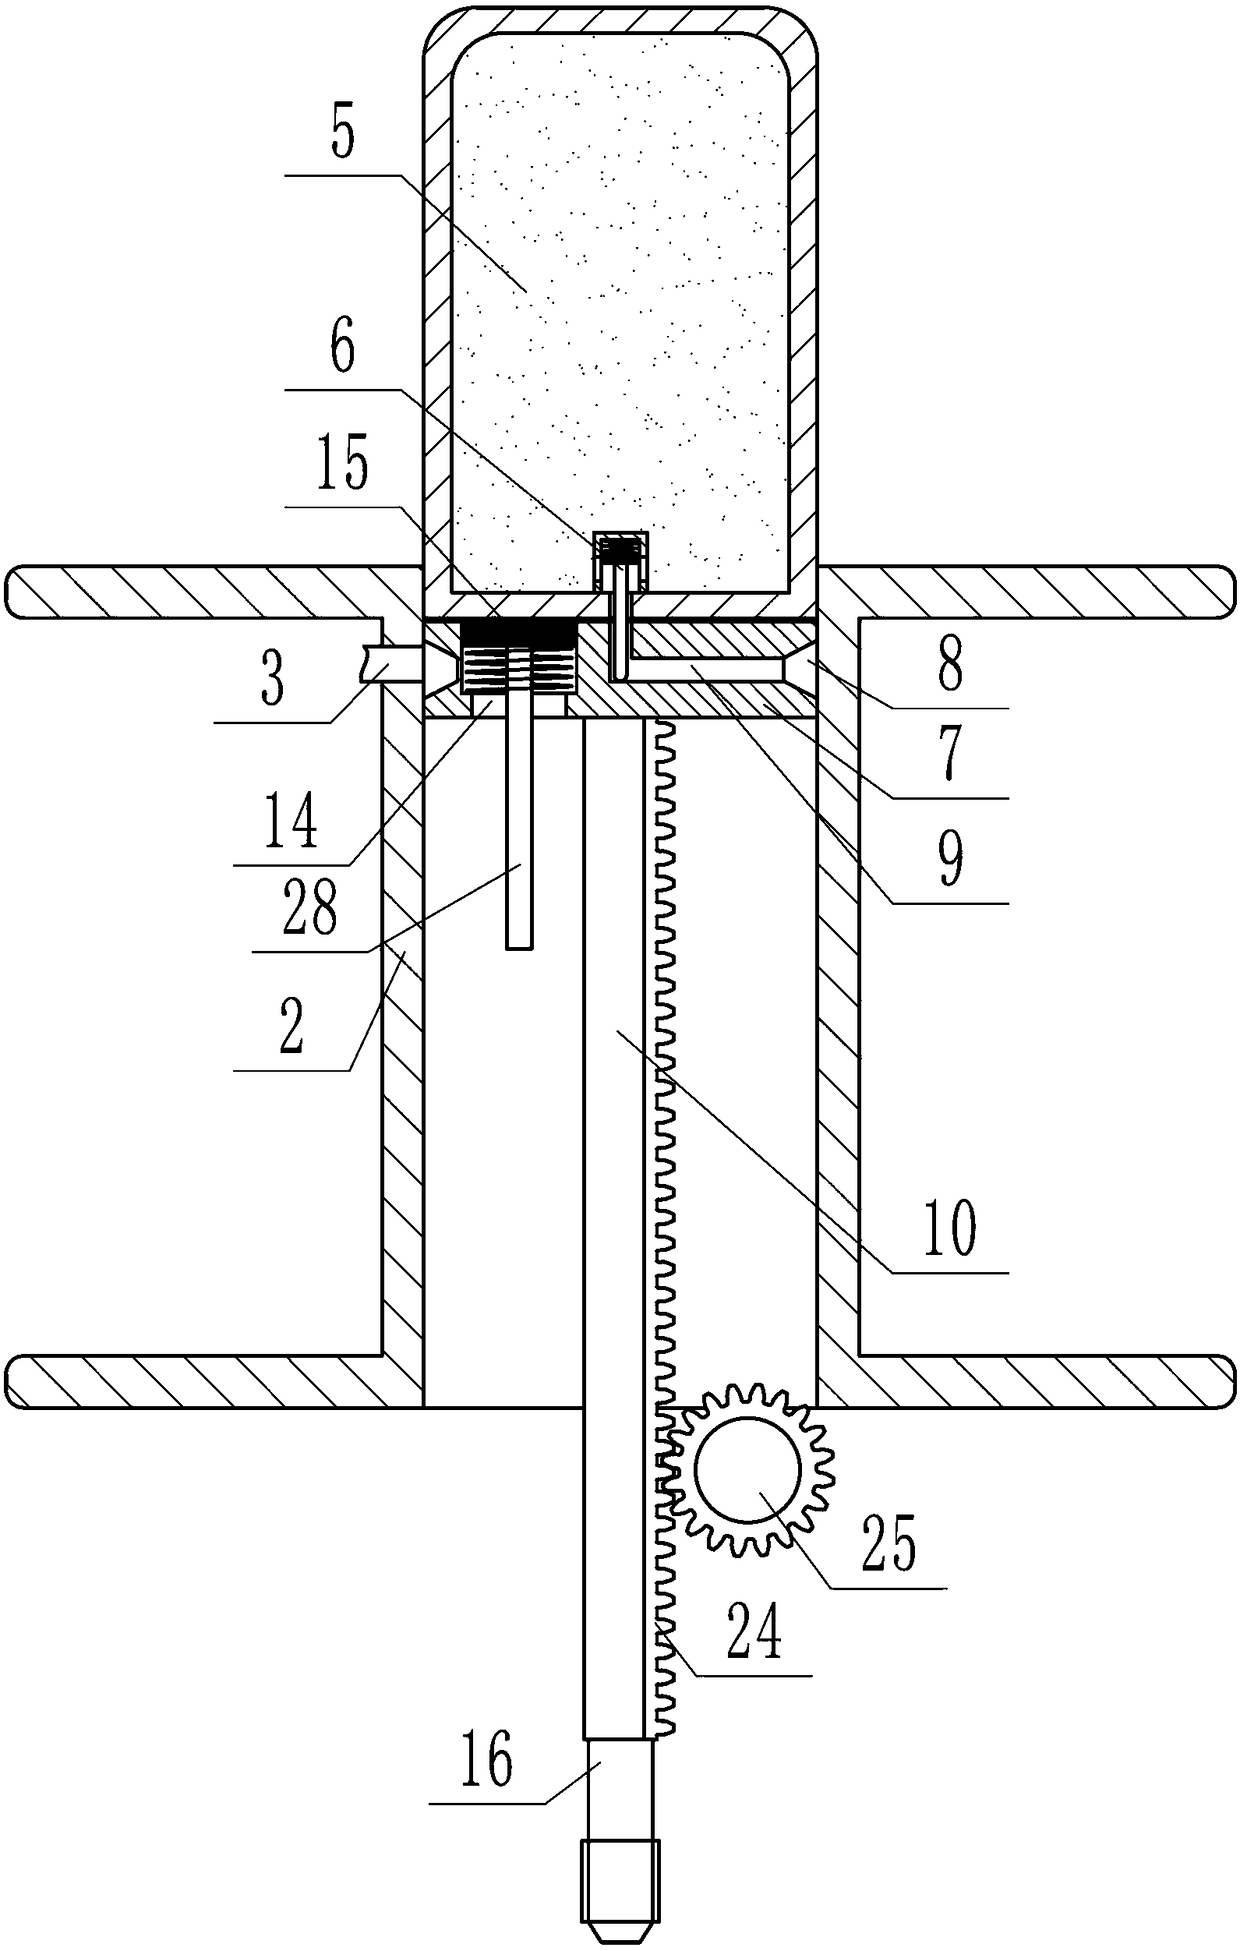 Stratified sampling device for water